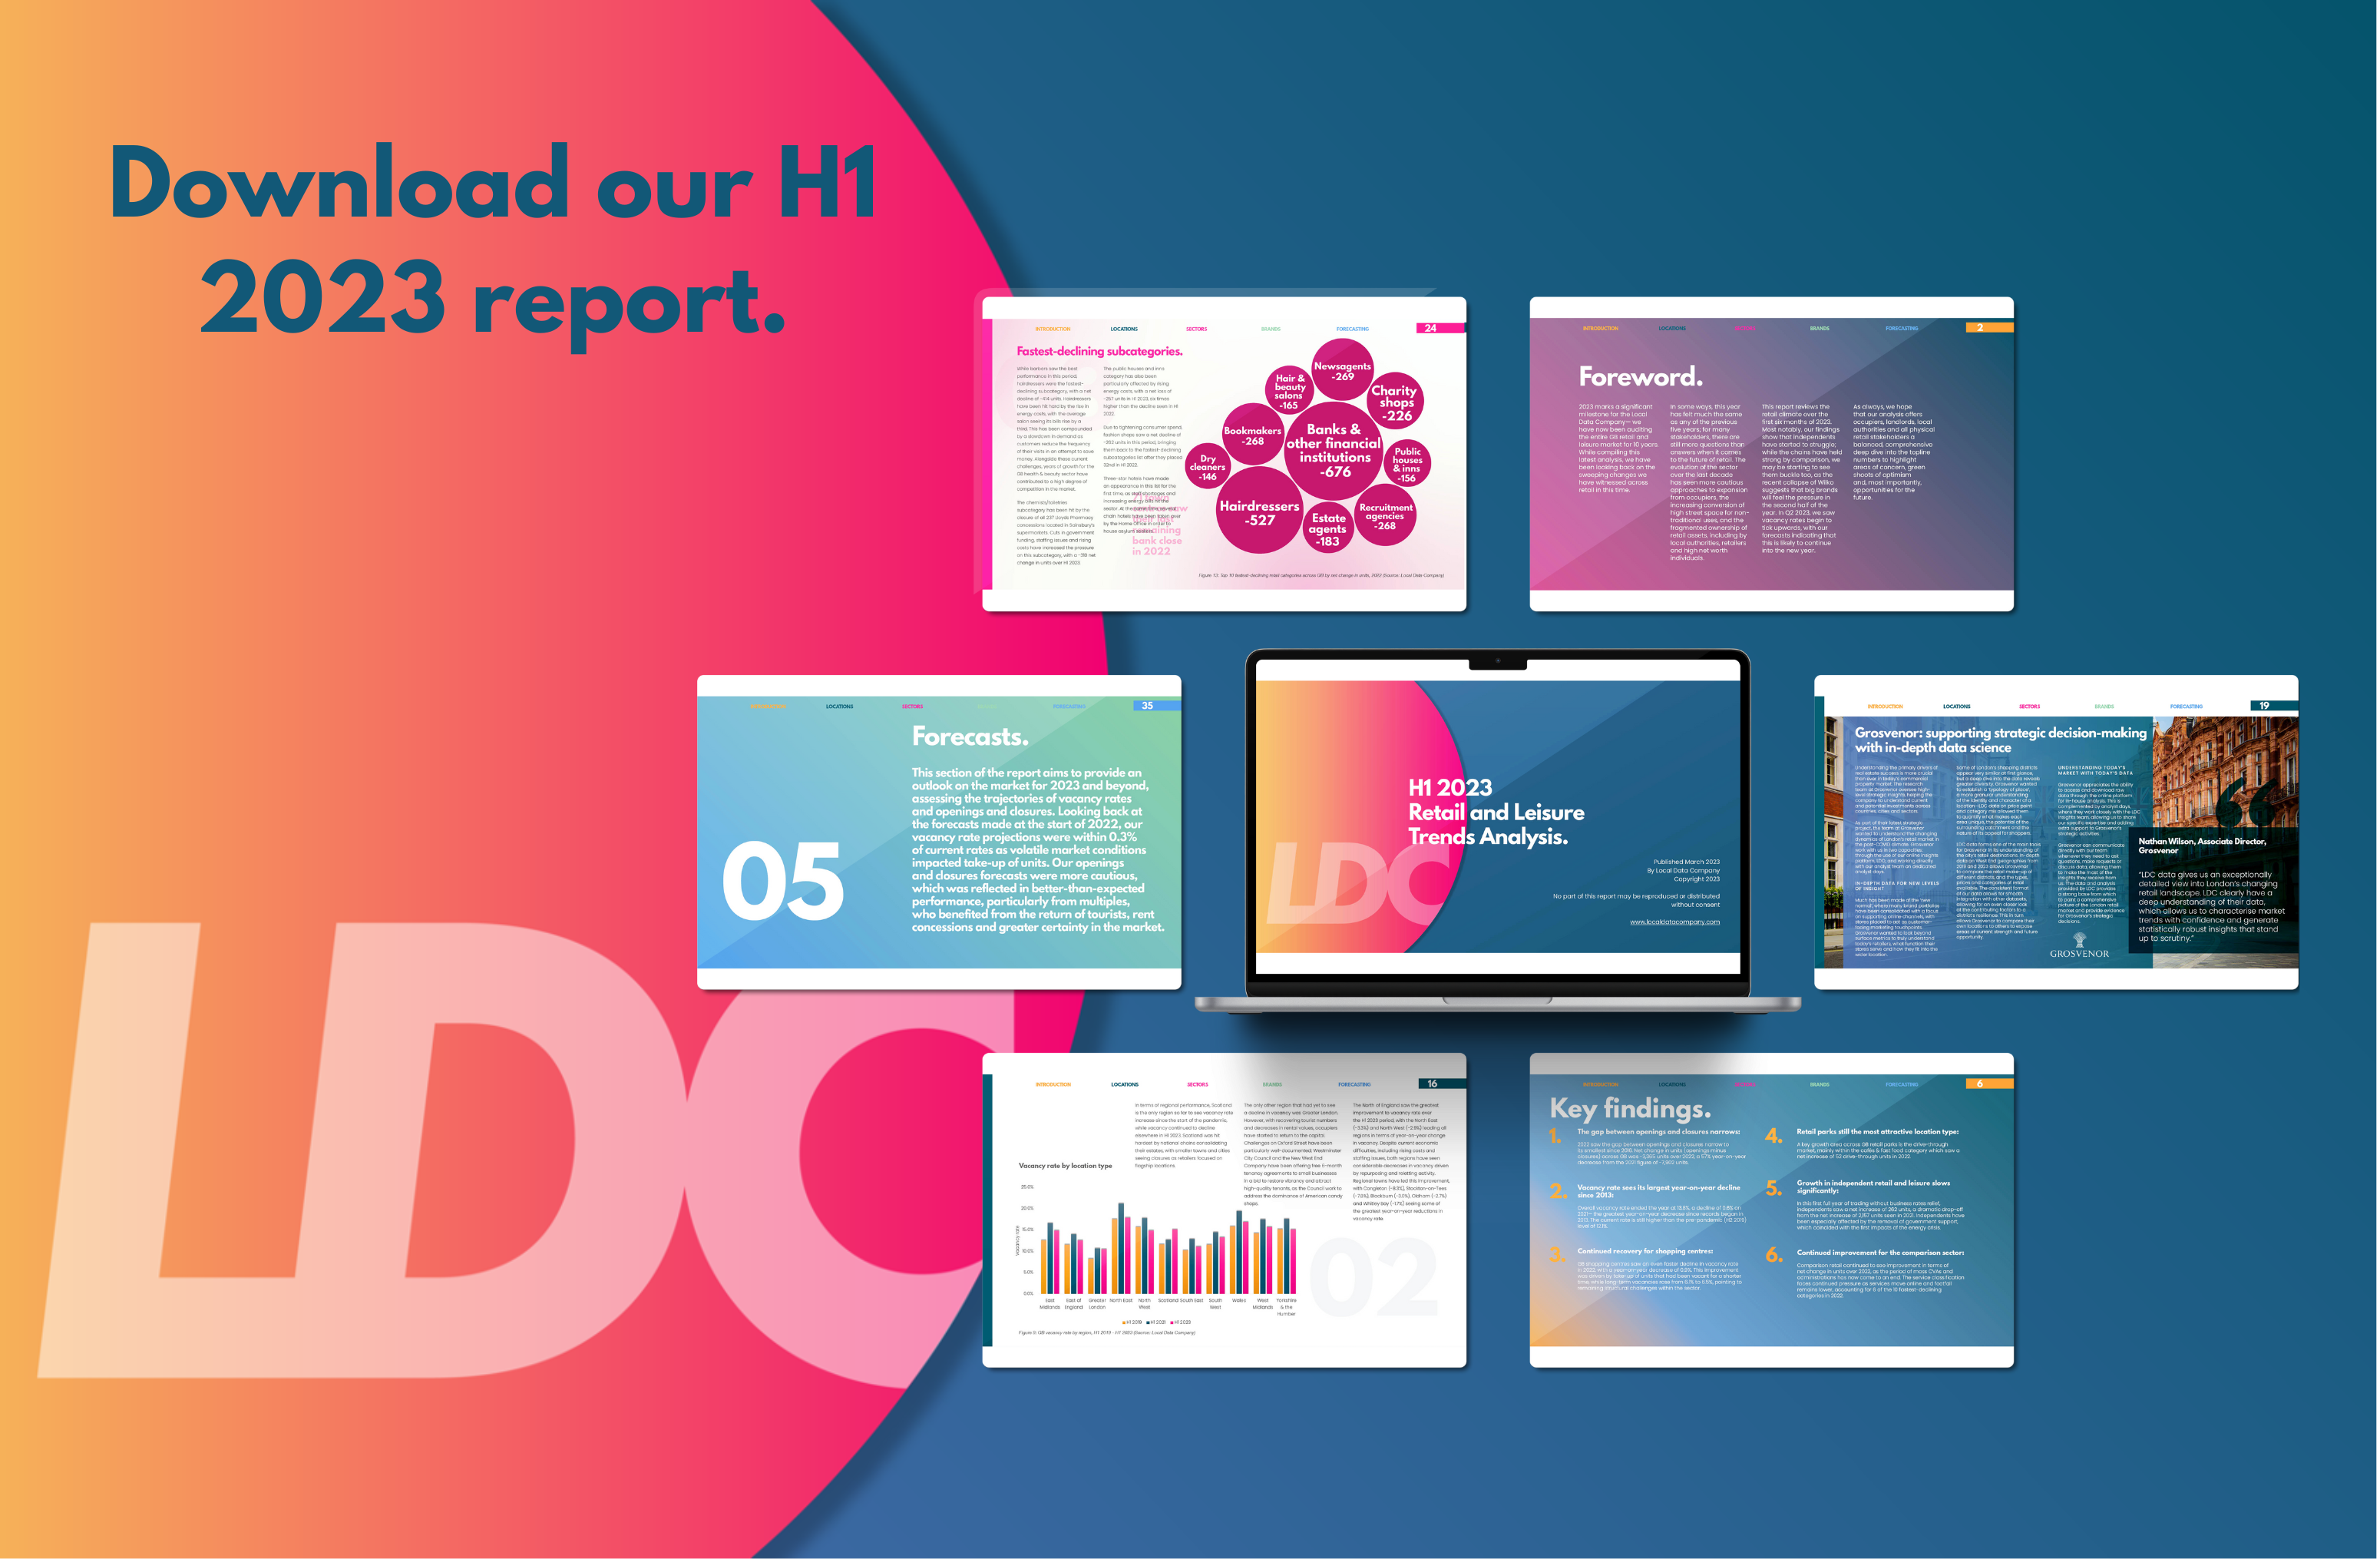 Download our H1 2023 report. (1)